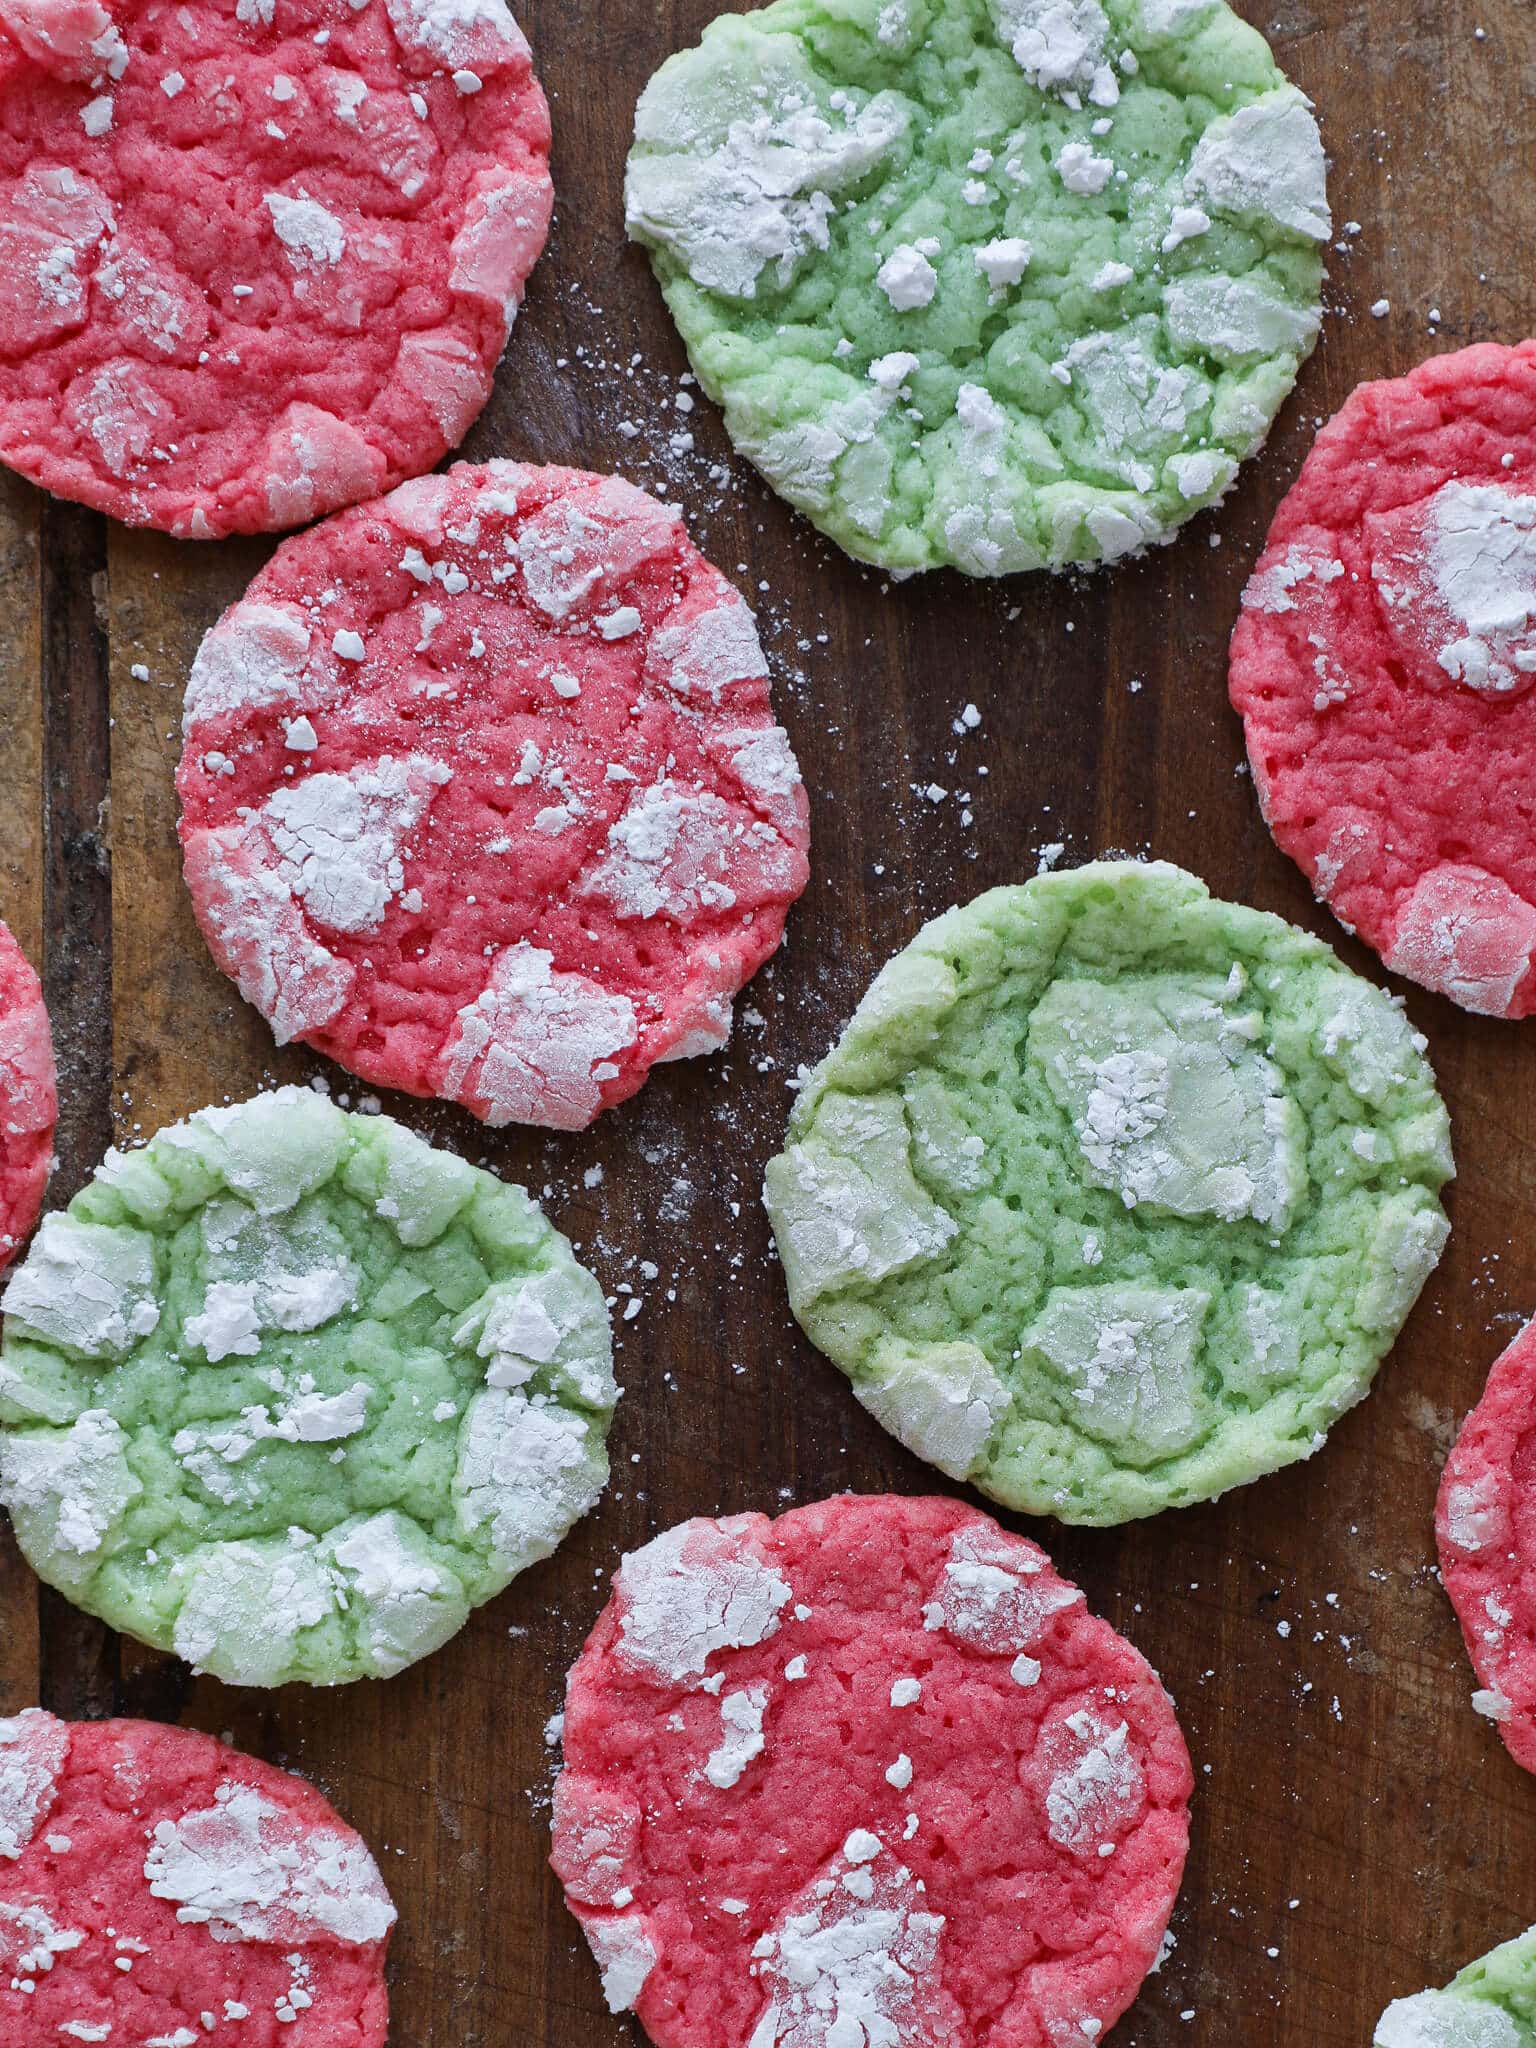 Festive Almond Crinkle Cookies arranged on wooden surface